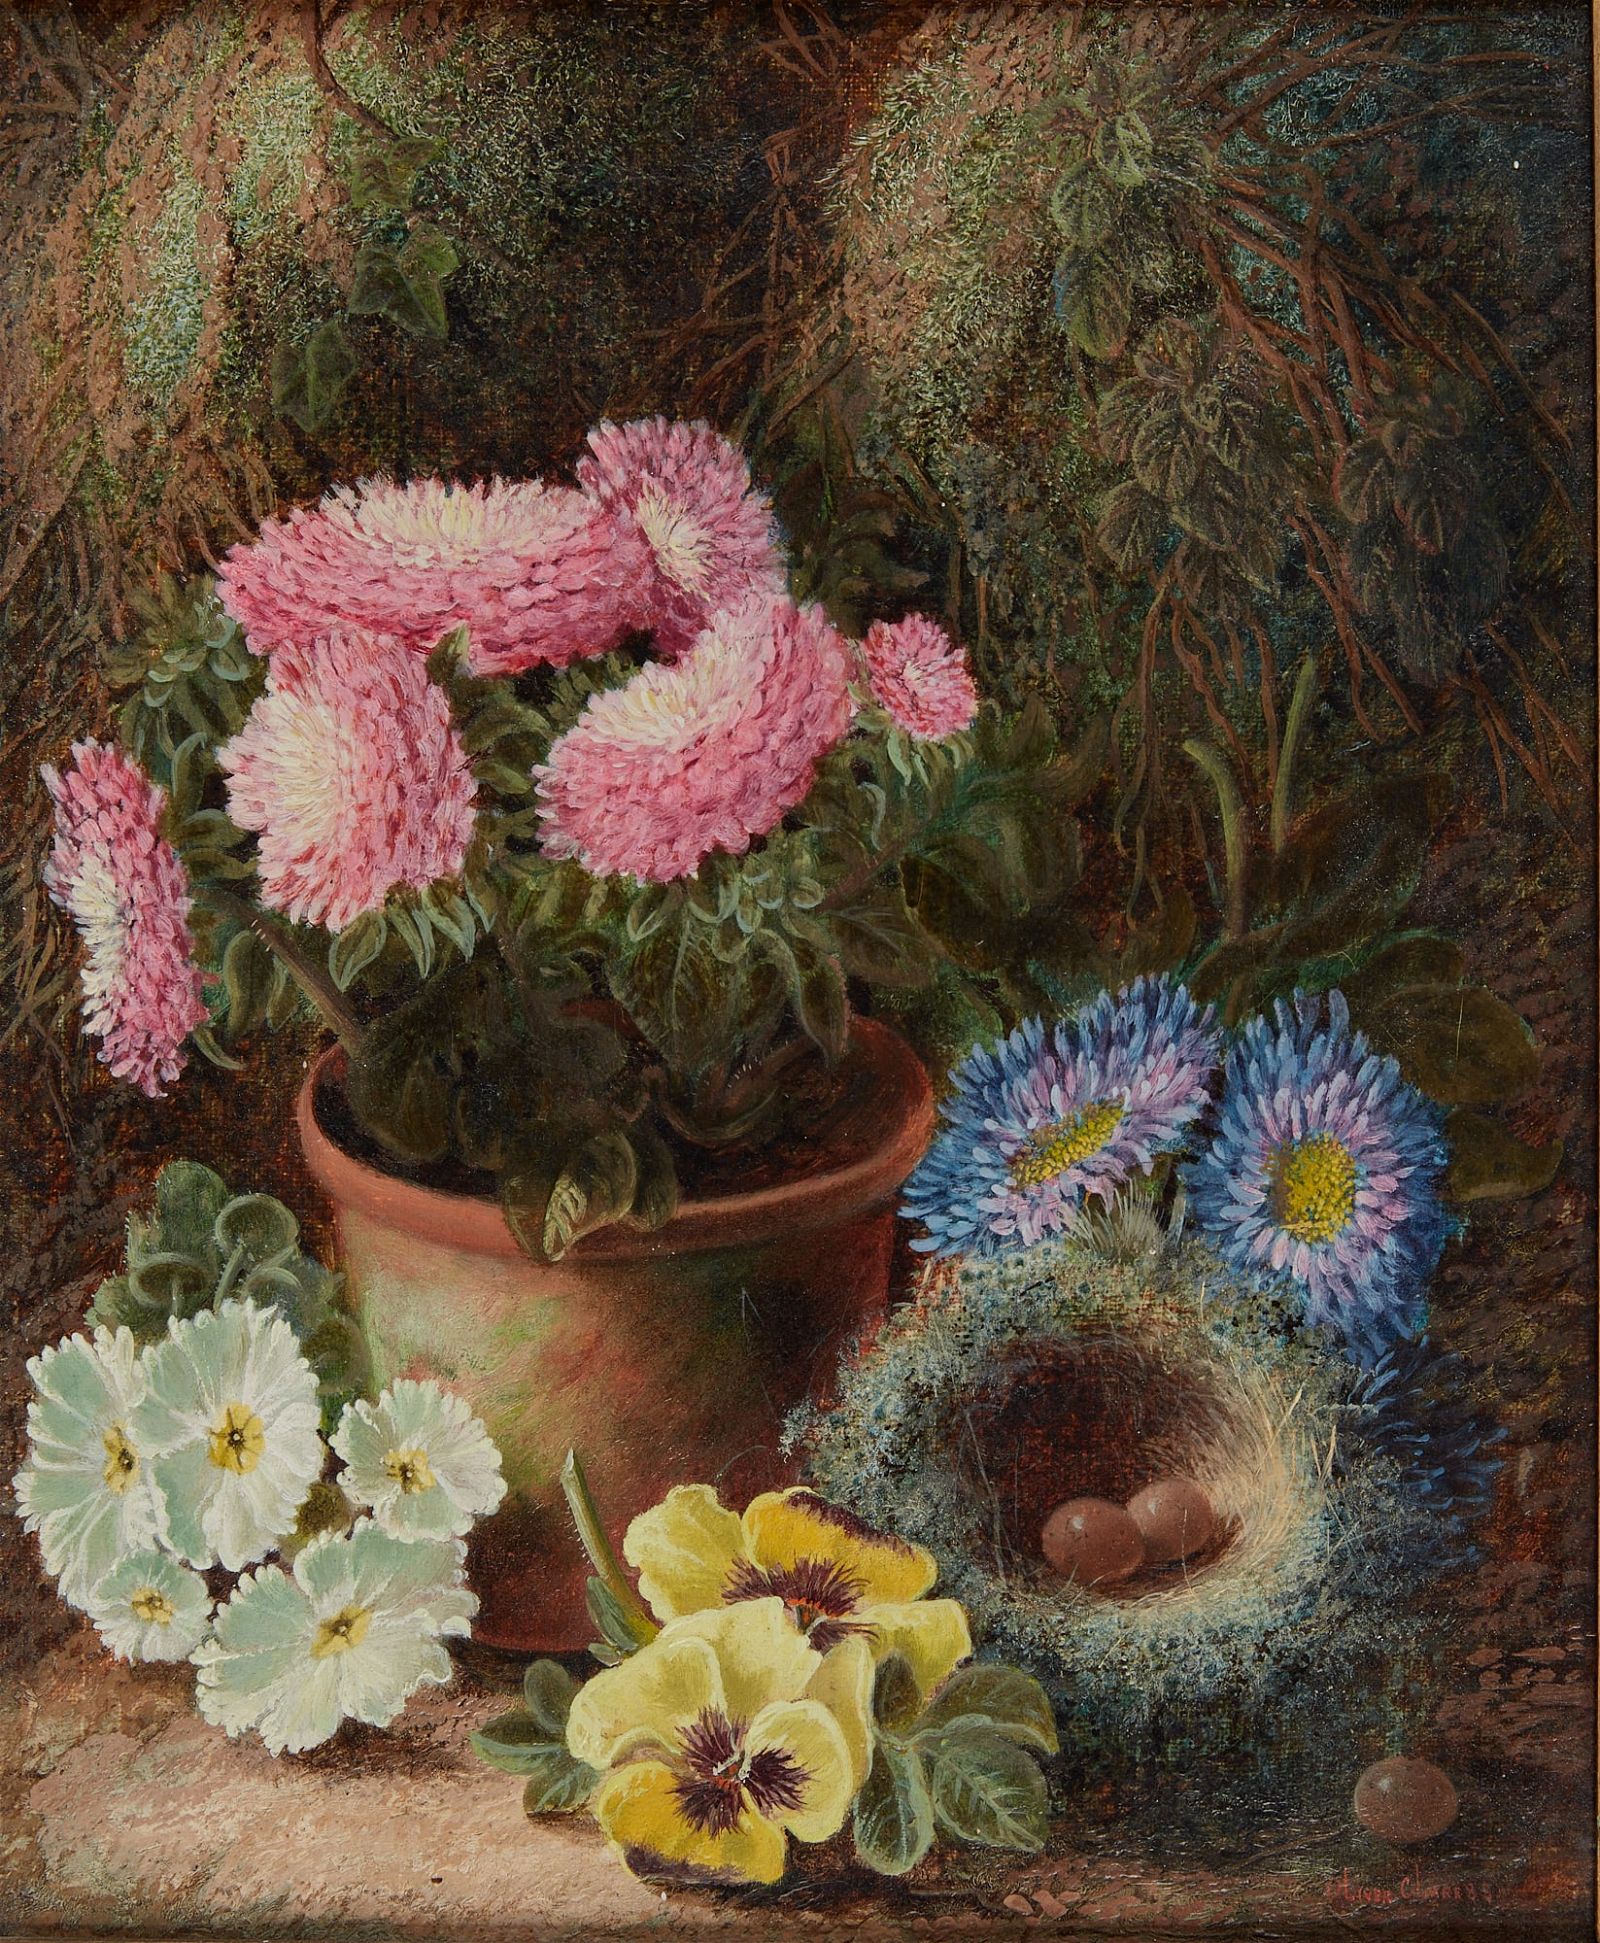 OLIVER CLARE, STILL LIFE WITH FLOWERS